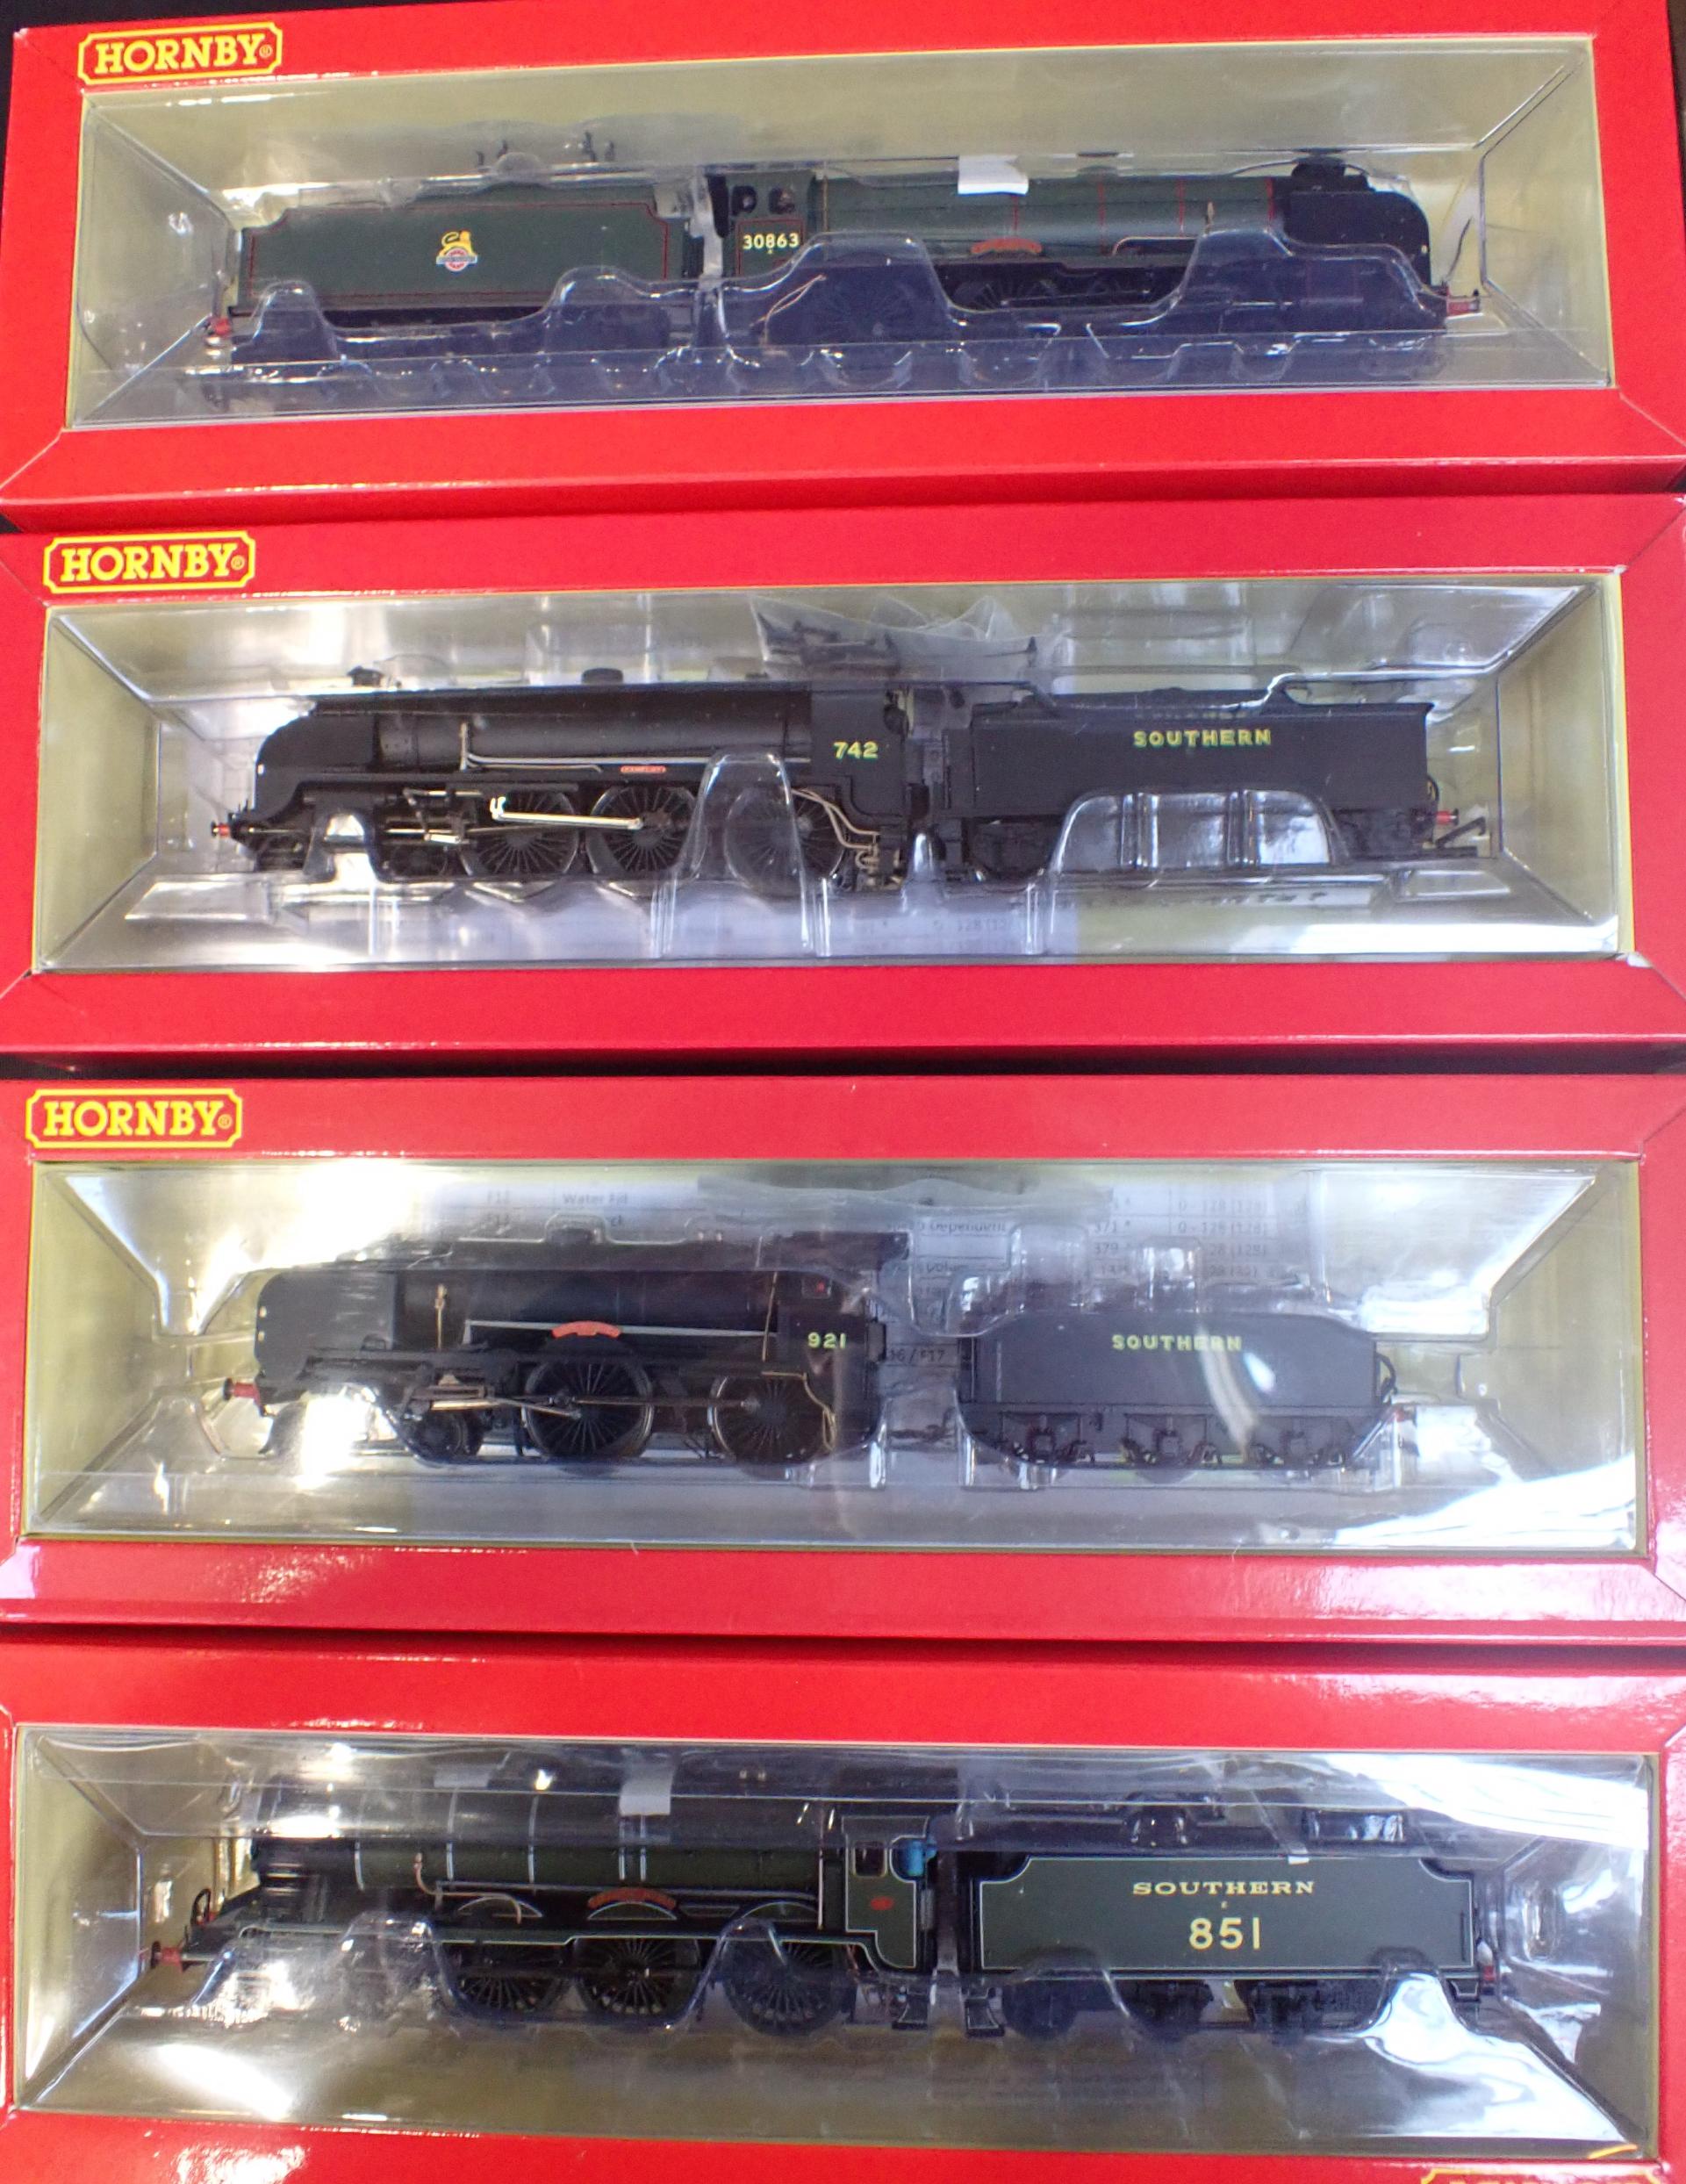 HORNBY 00 GAUGE SOUTHERN RAILWAY LOCOMOTIVES BOXED AS NEW - Image 2 of 3